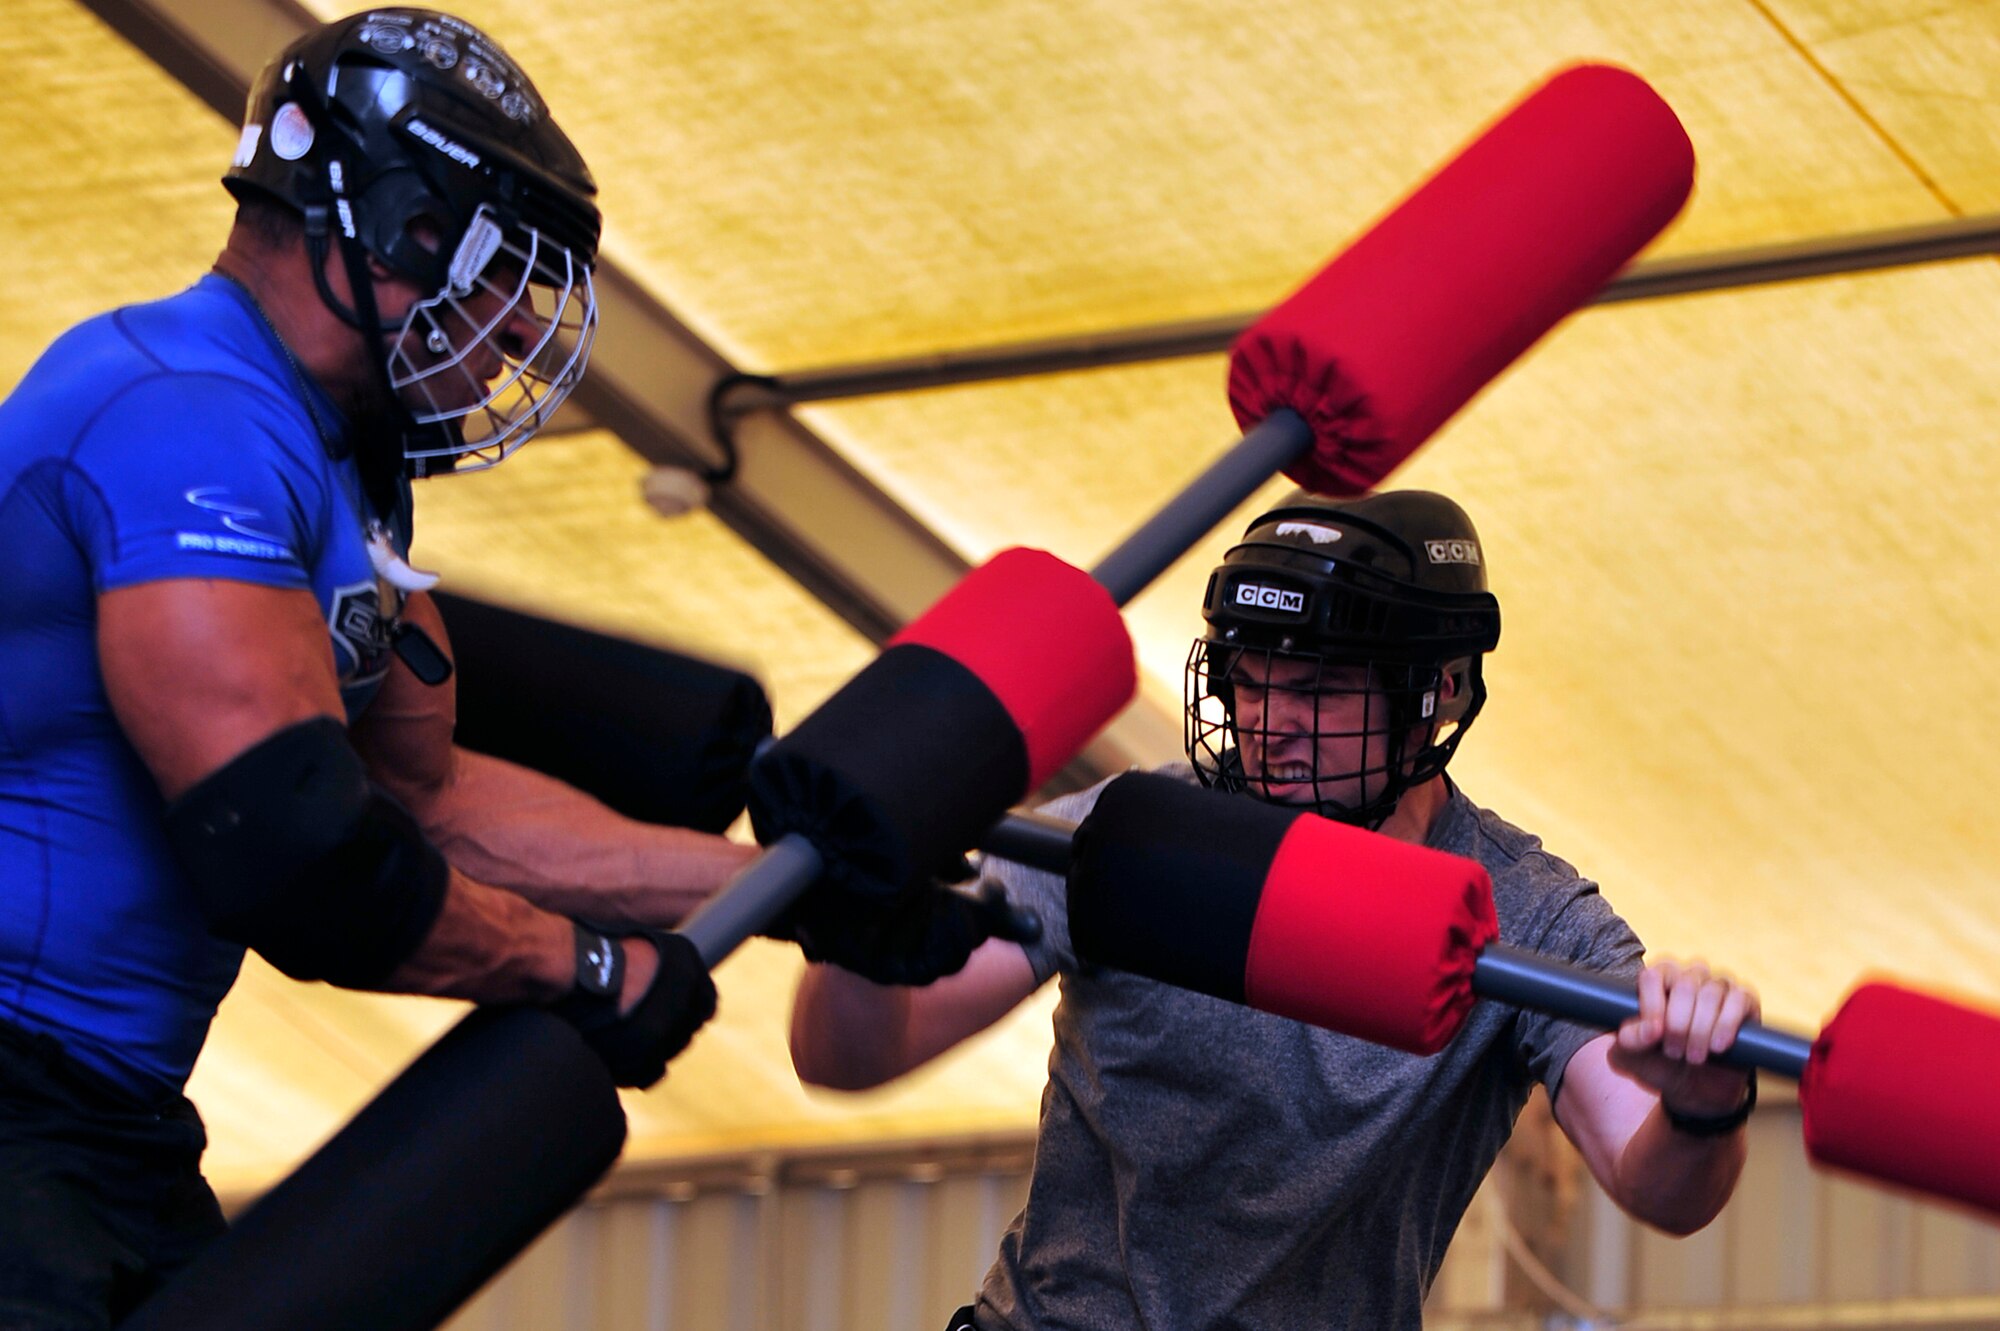 U.S. Air Force Staff Sgt. Josef Miller, 380th Expeditionary Civil Engineer Squadron explosive ordnance disposal technician, deployed from Andersen Air Force Base, Guam, competes against American Gladiator, Alex "Militia" Castro, during the Joust competition at an undisclosed location in Southwest Asia April 6, 2013. The Gladiators and Billy Blanks visited several bases in Southwest Asia during an Armed Forces Entertainment Fitness Tour. (U.S. Air Force photo by Tech. Sgt. Christina M. Styer/Released) 